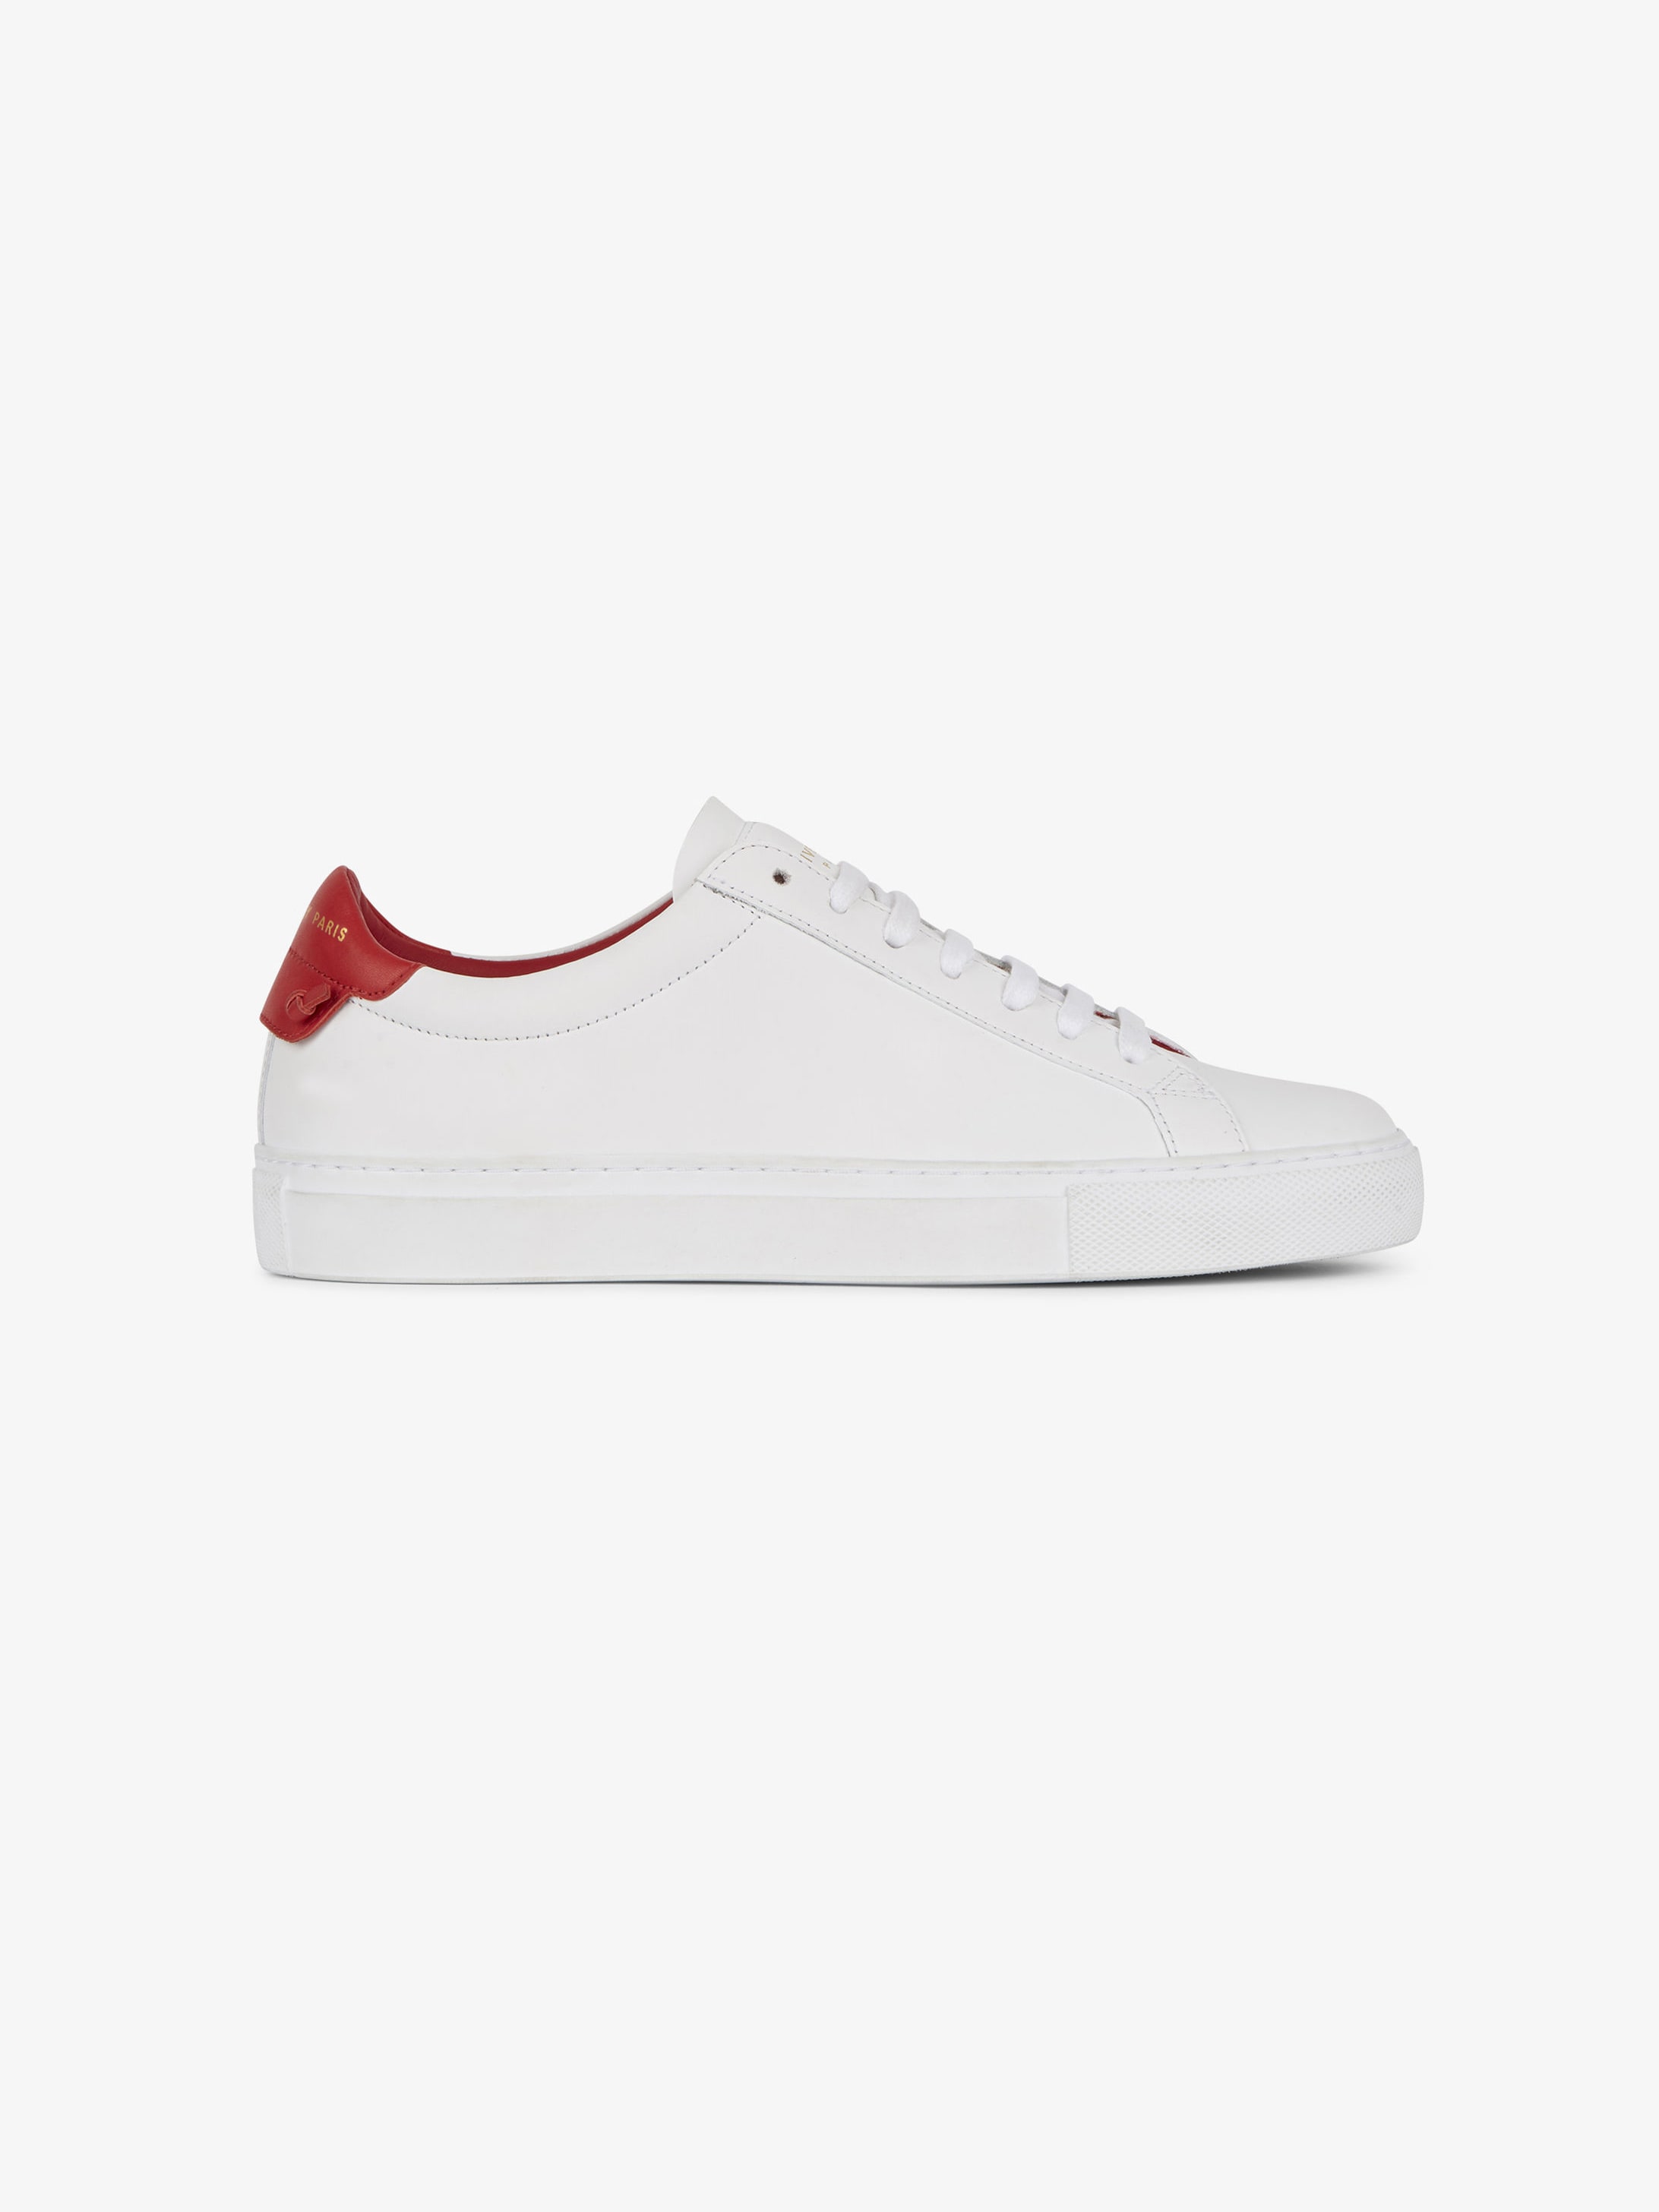 givenchy urban street sneakers